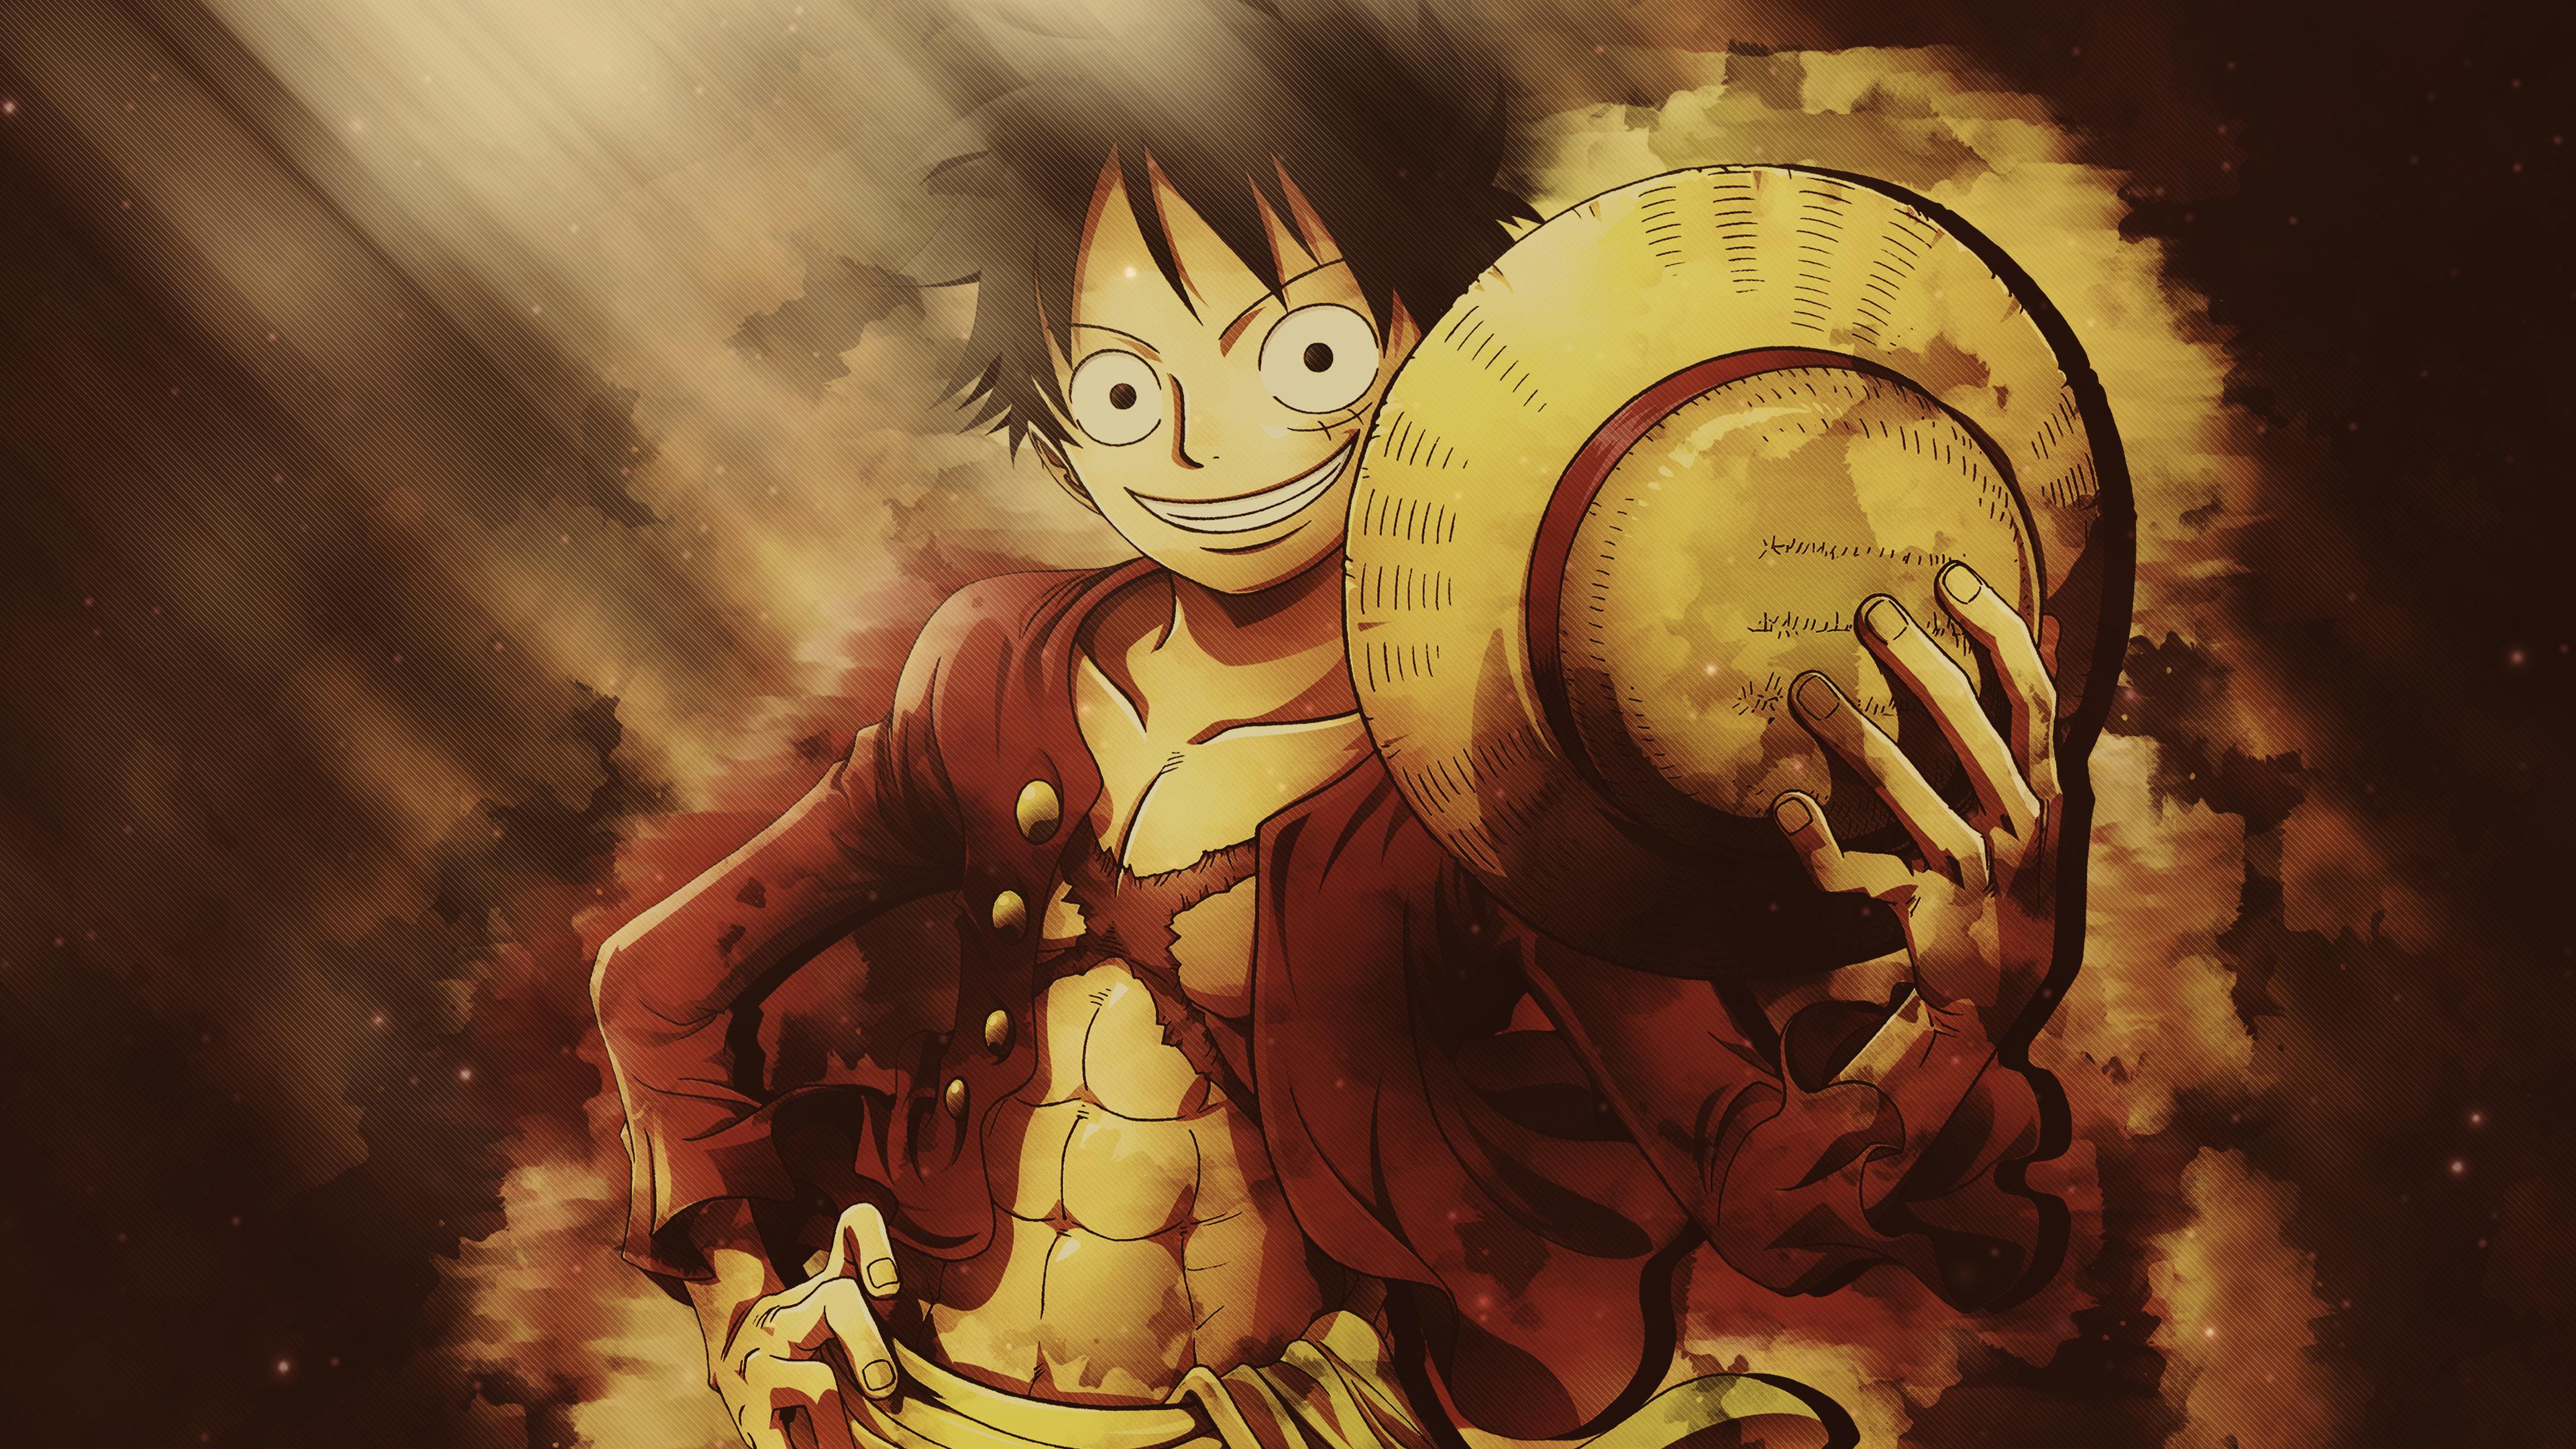 Monkey D. Luffy from One Piece Anime Wallpapers 4k Ultra HD.